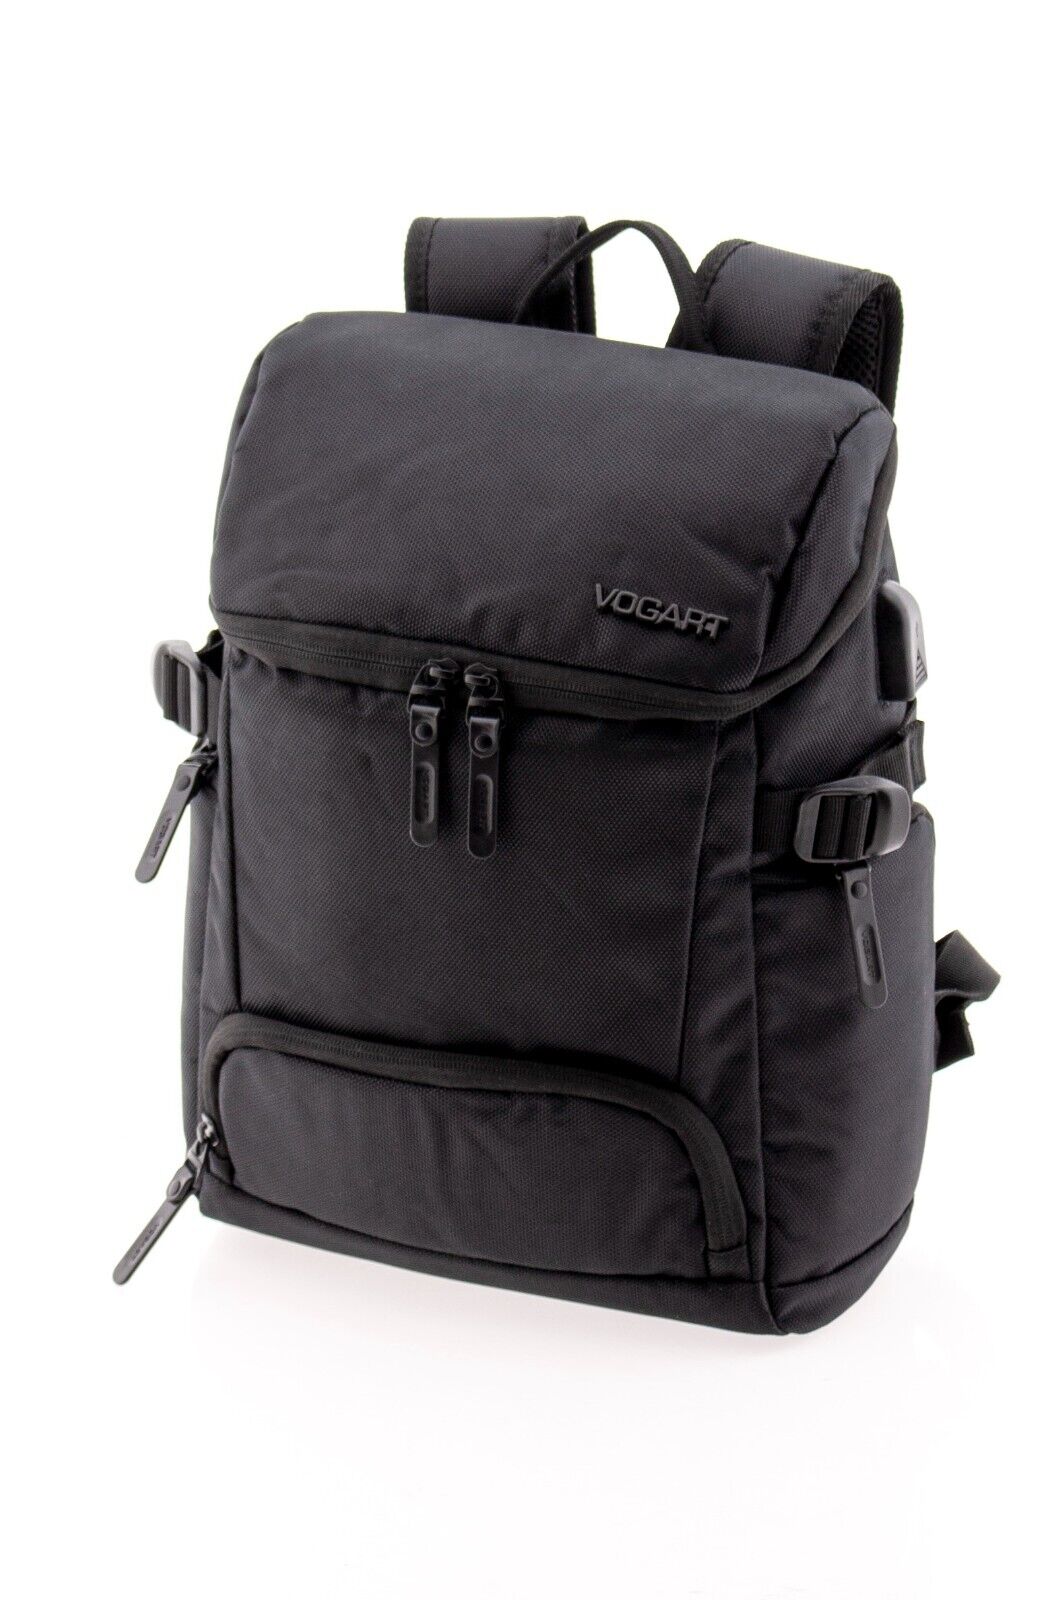 Vogart® Climb Laptop Backpack Manufactured in Spain